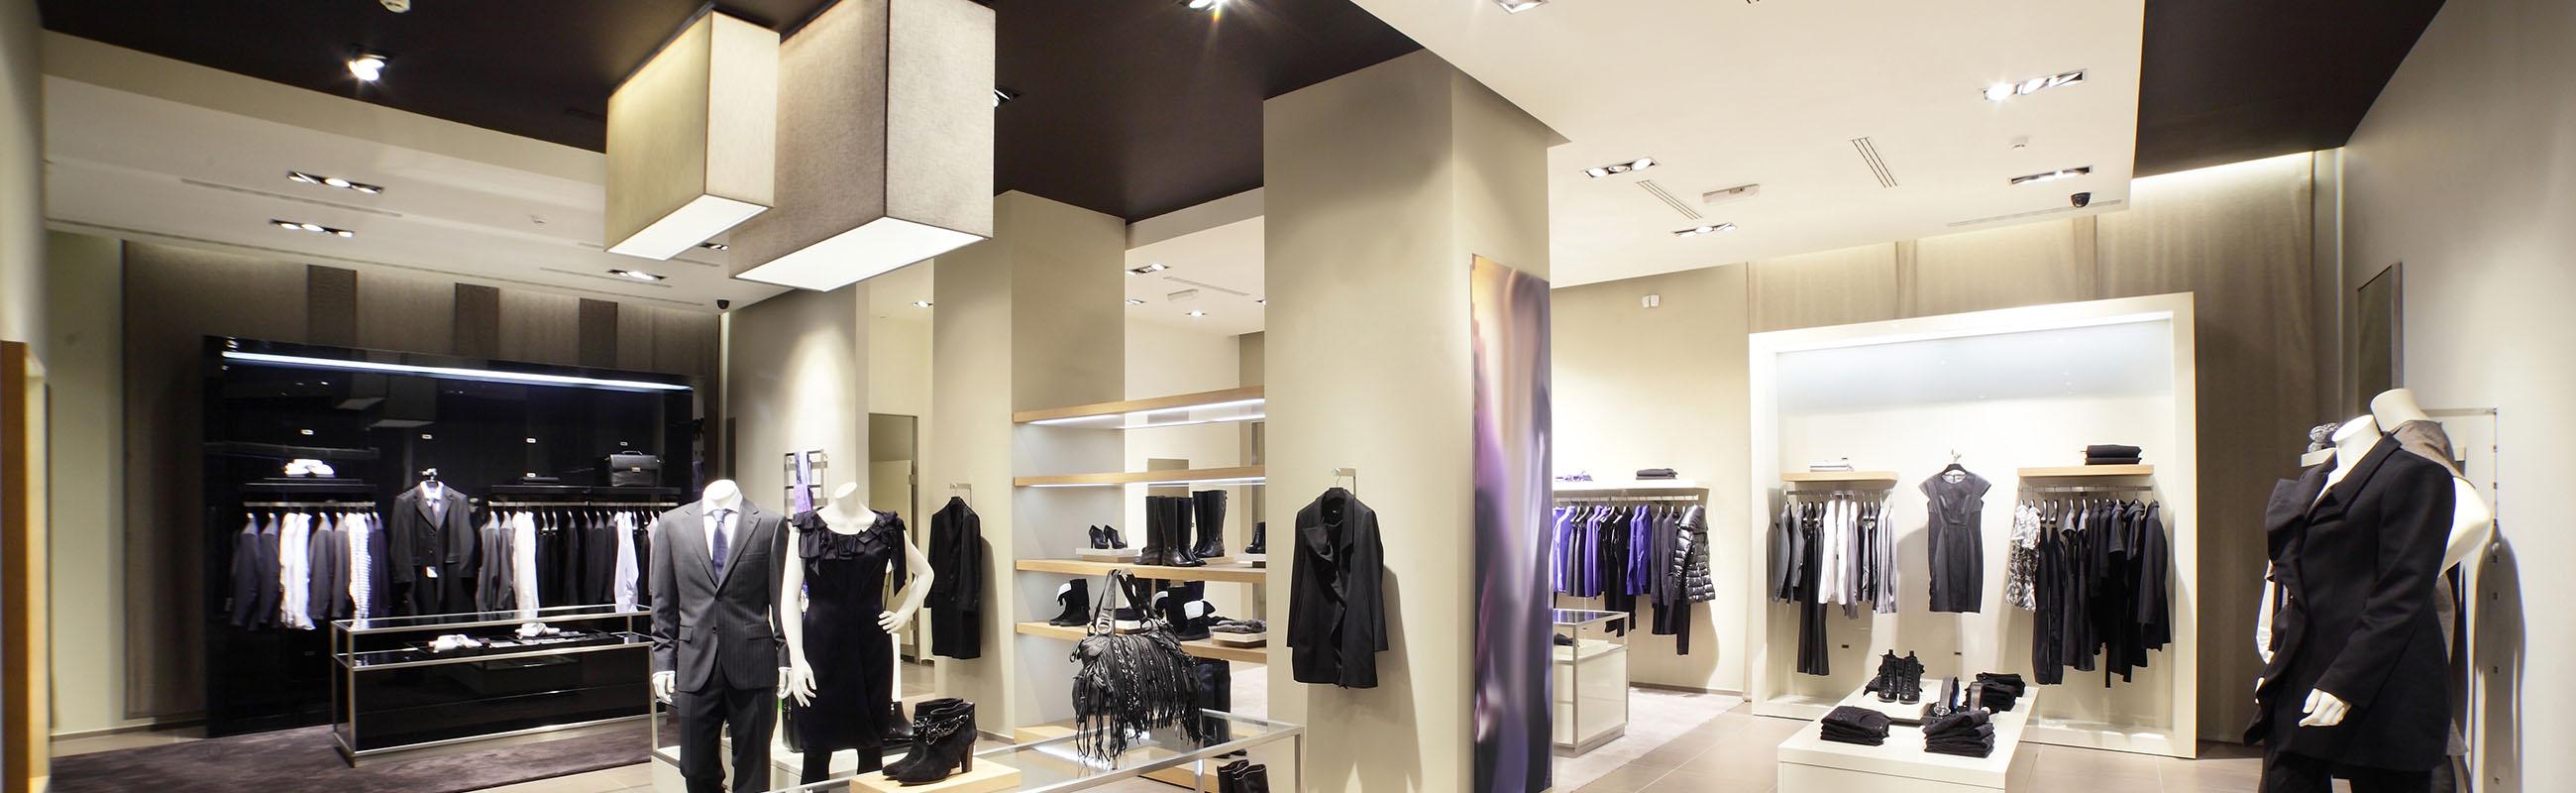 Lighting for retail units